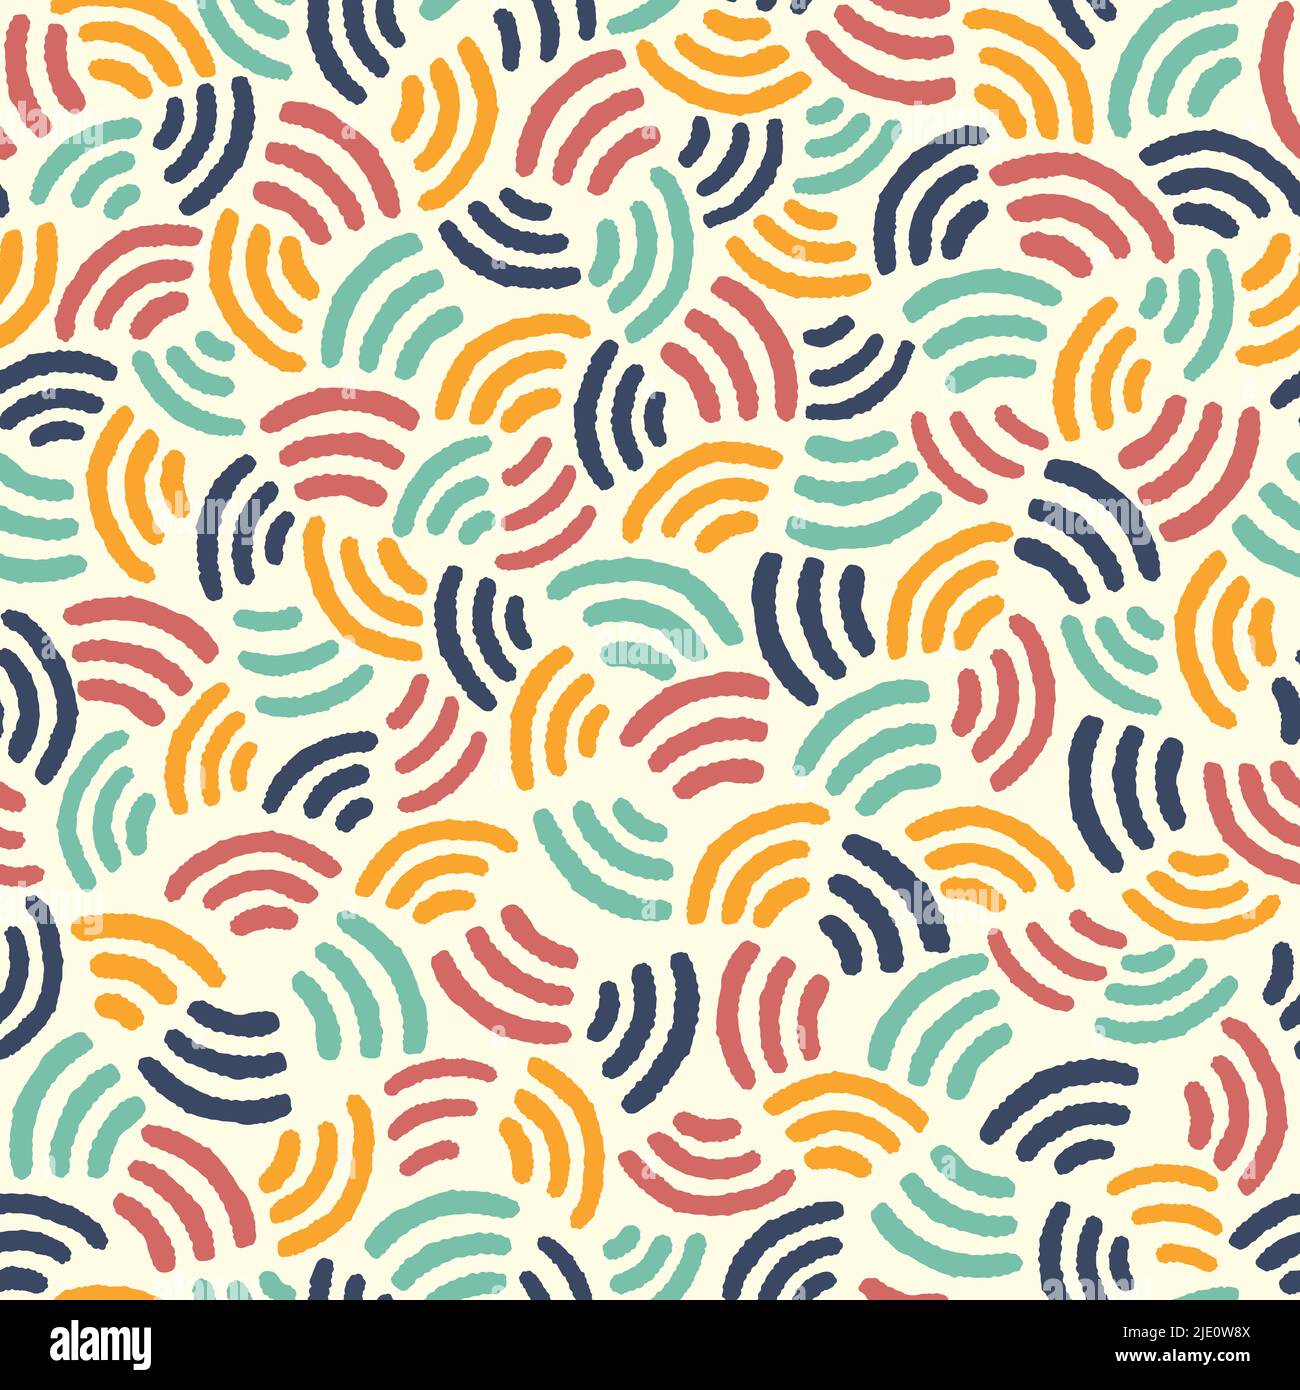 Fun hand drawn abstract seamless pattern, simple geometric background, doodle style - great for textiles, banners, wallpapers, wrapping - vector desig Stock Vector